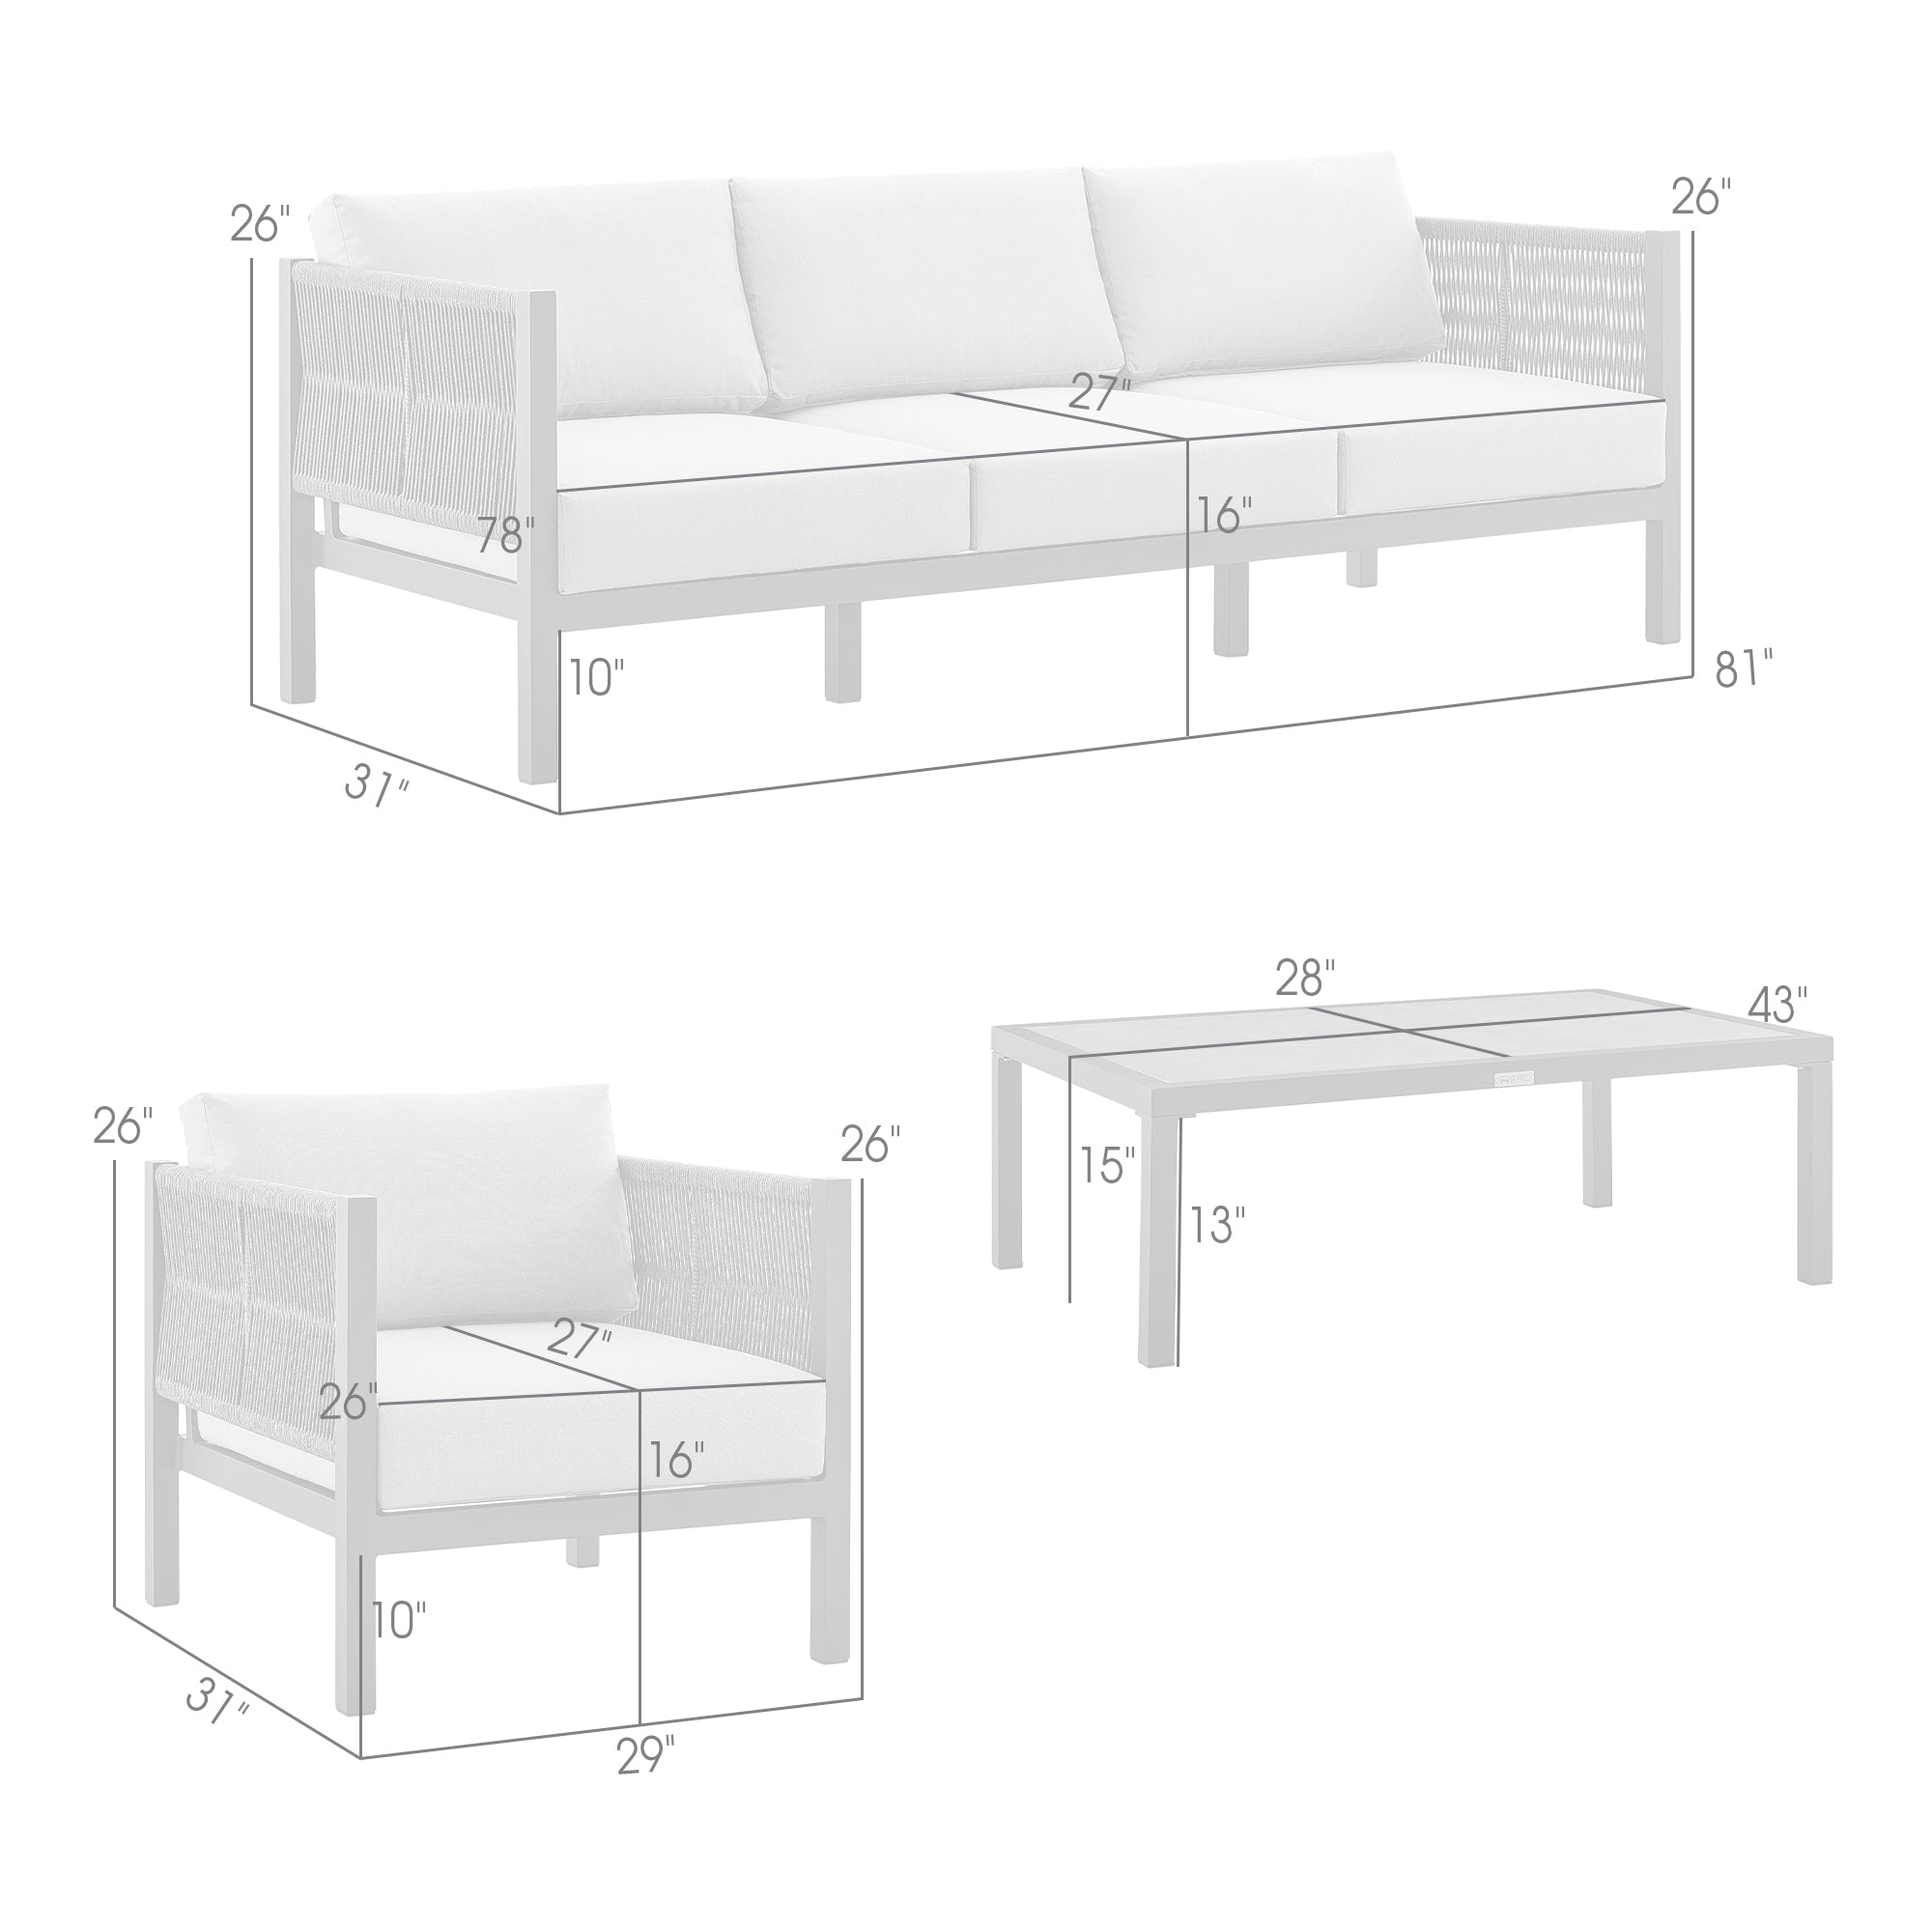 Armen Living - Cuffay 4 Piece Outdoor Patio Furniture Set in Aluminum and Rope with Cushions - 840254332447